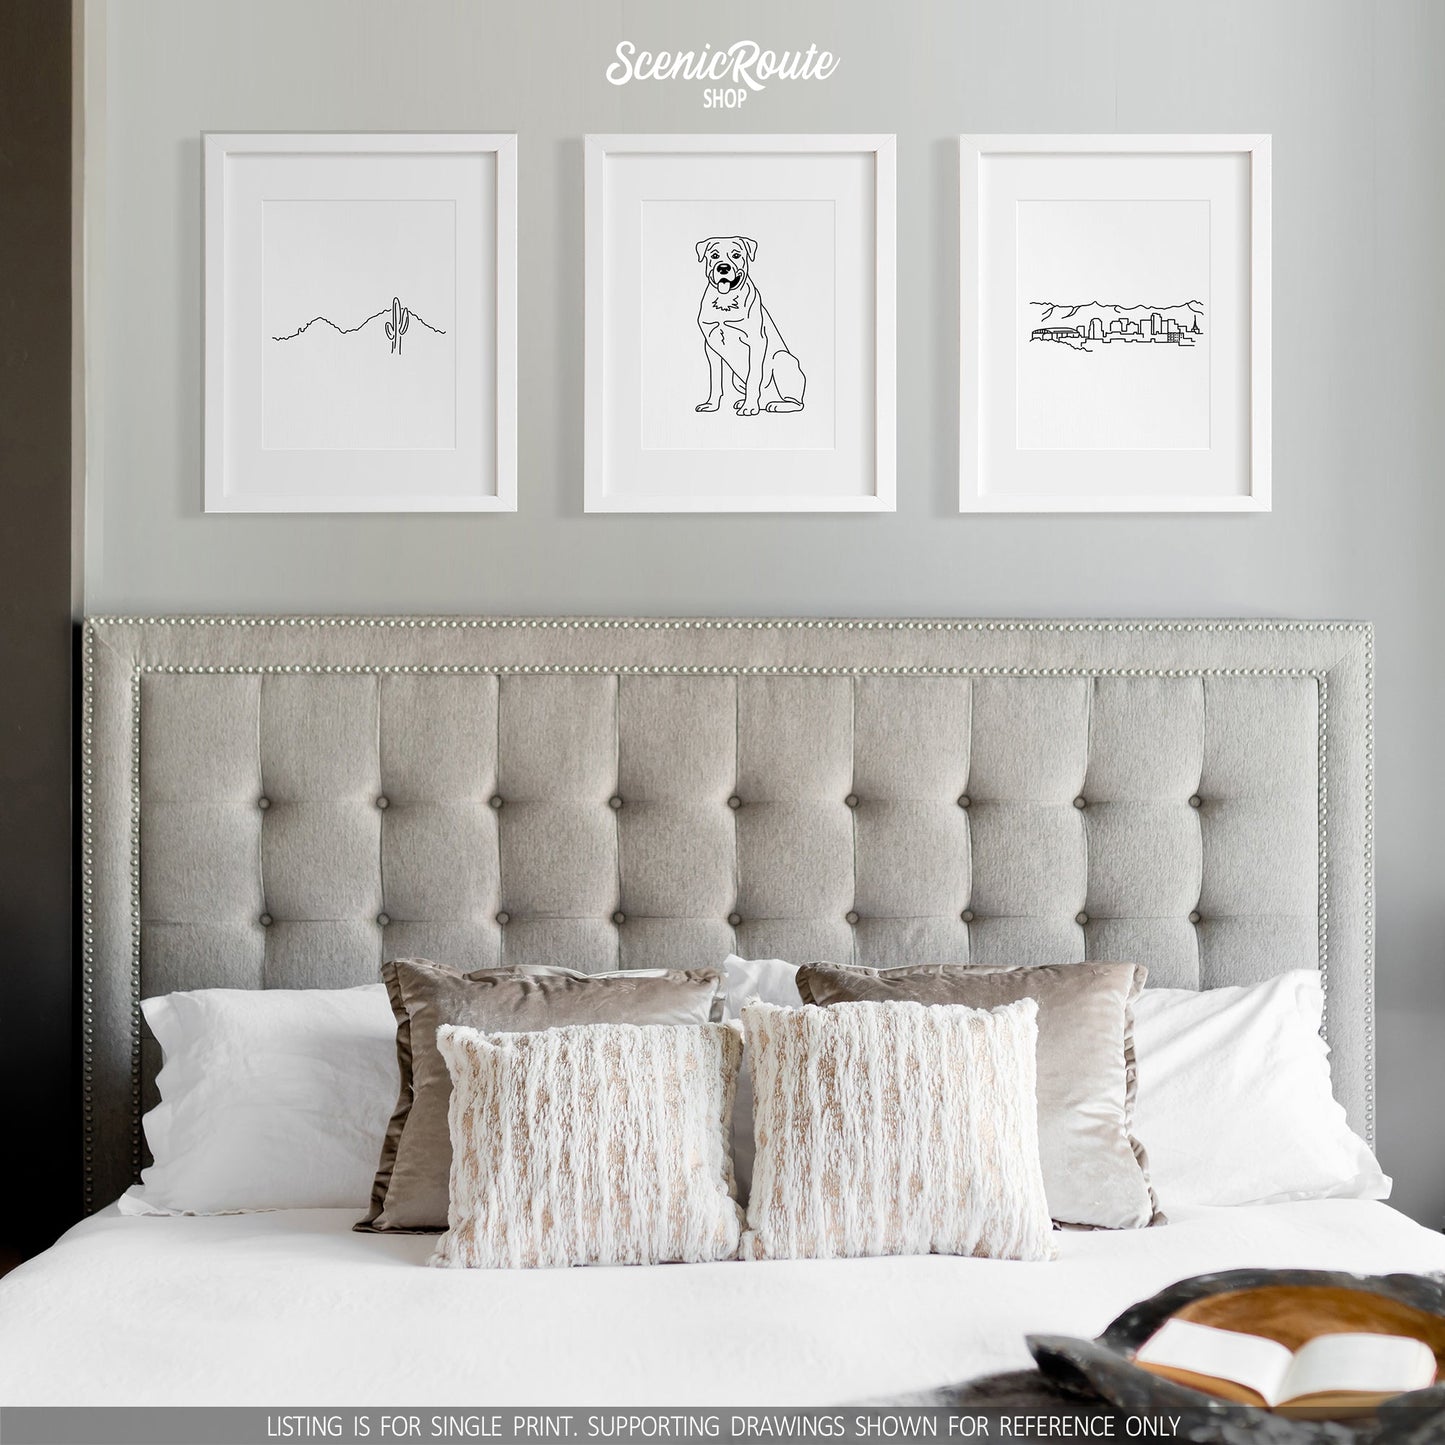 A group of three framed drawings on a gray wall above a bed. The line art drawings include Camelback Mountain, a Rottweiler dog, and the Phoenix Skyline